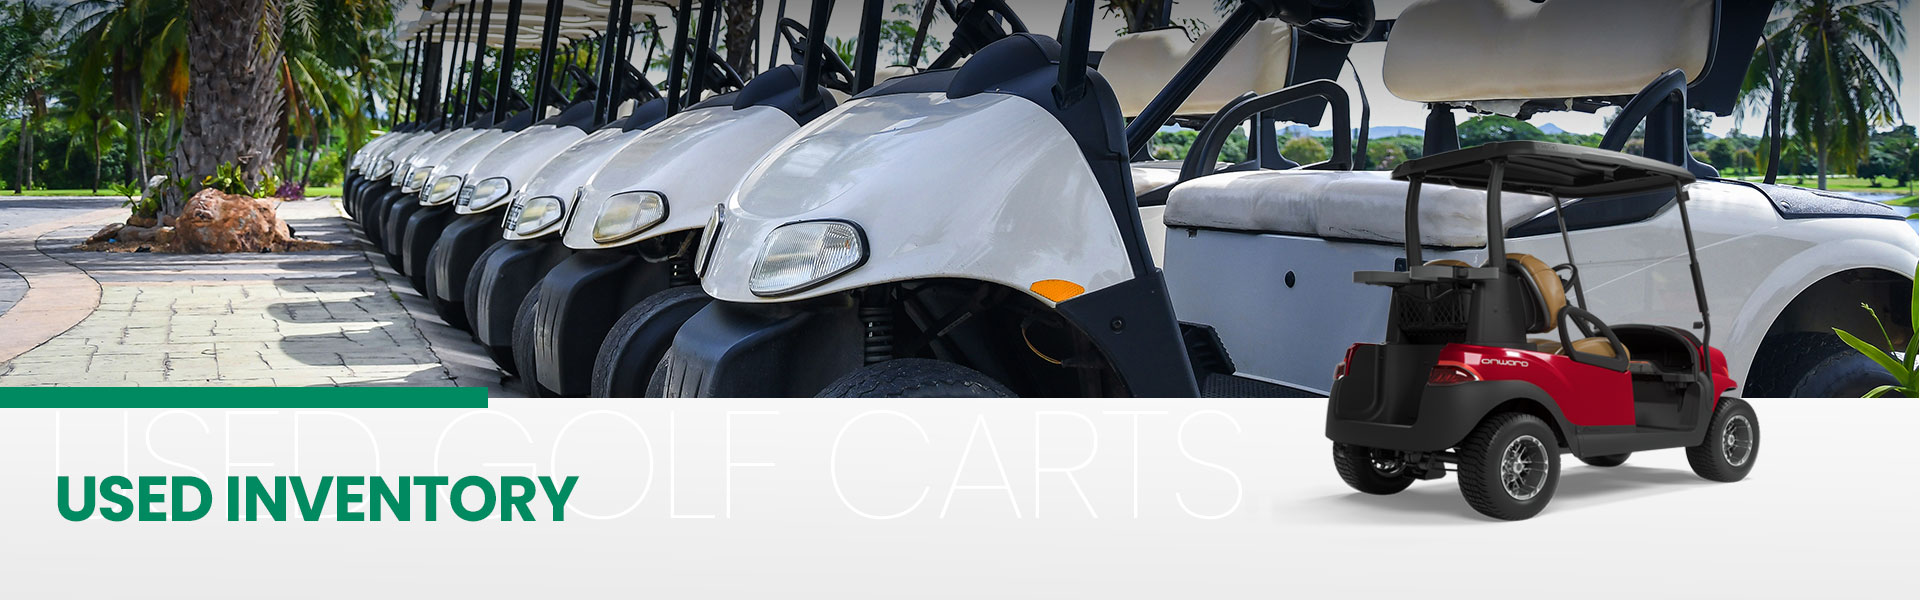 Golf Carts for Sale, Used Golf Carts For Sale